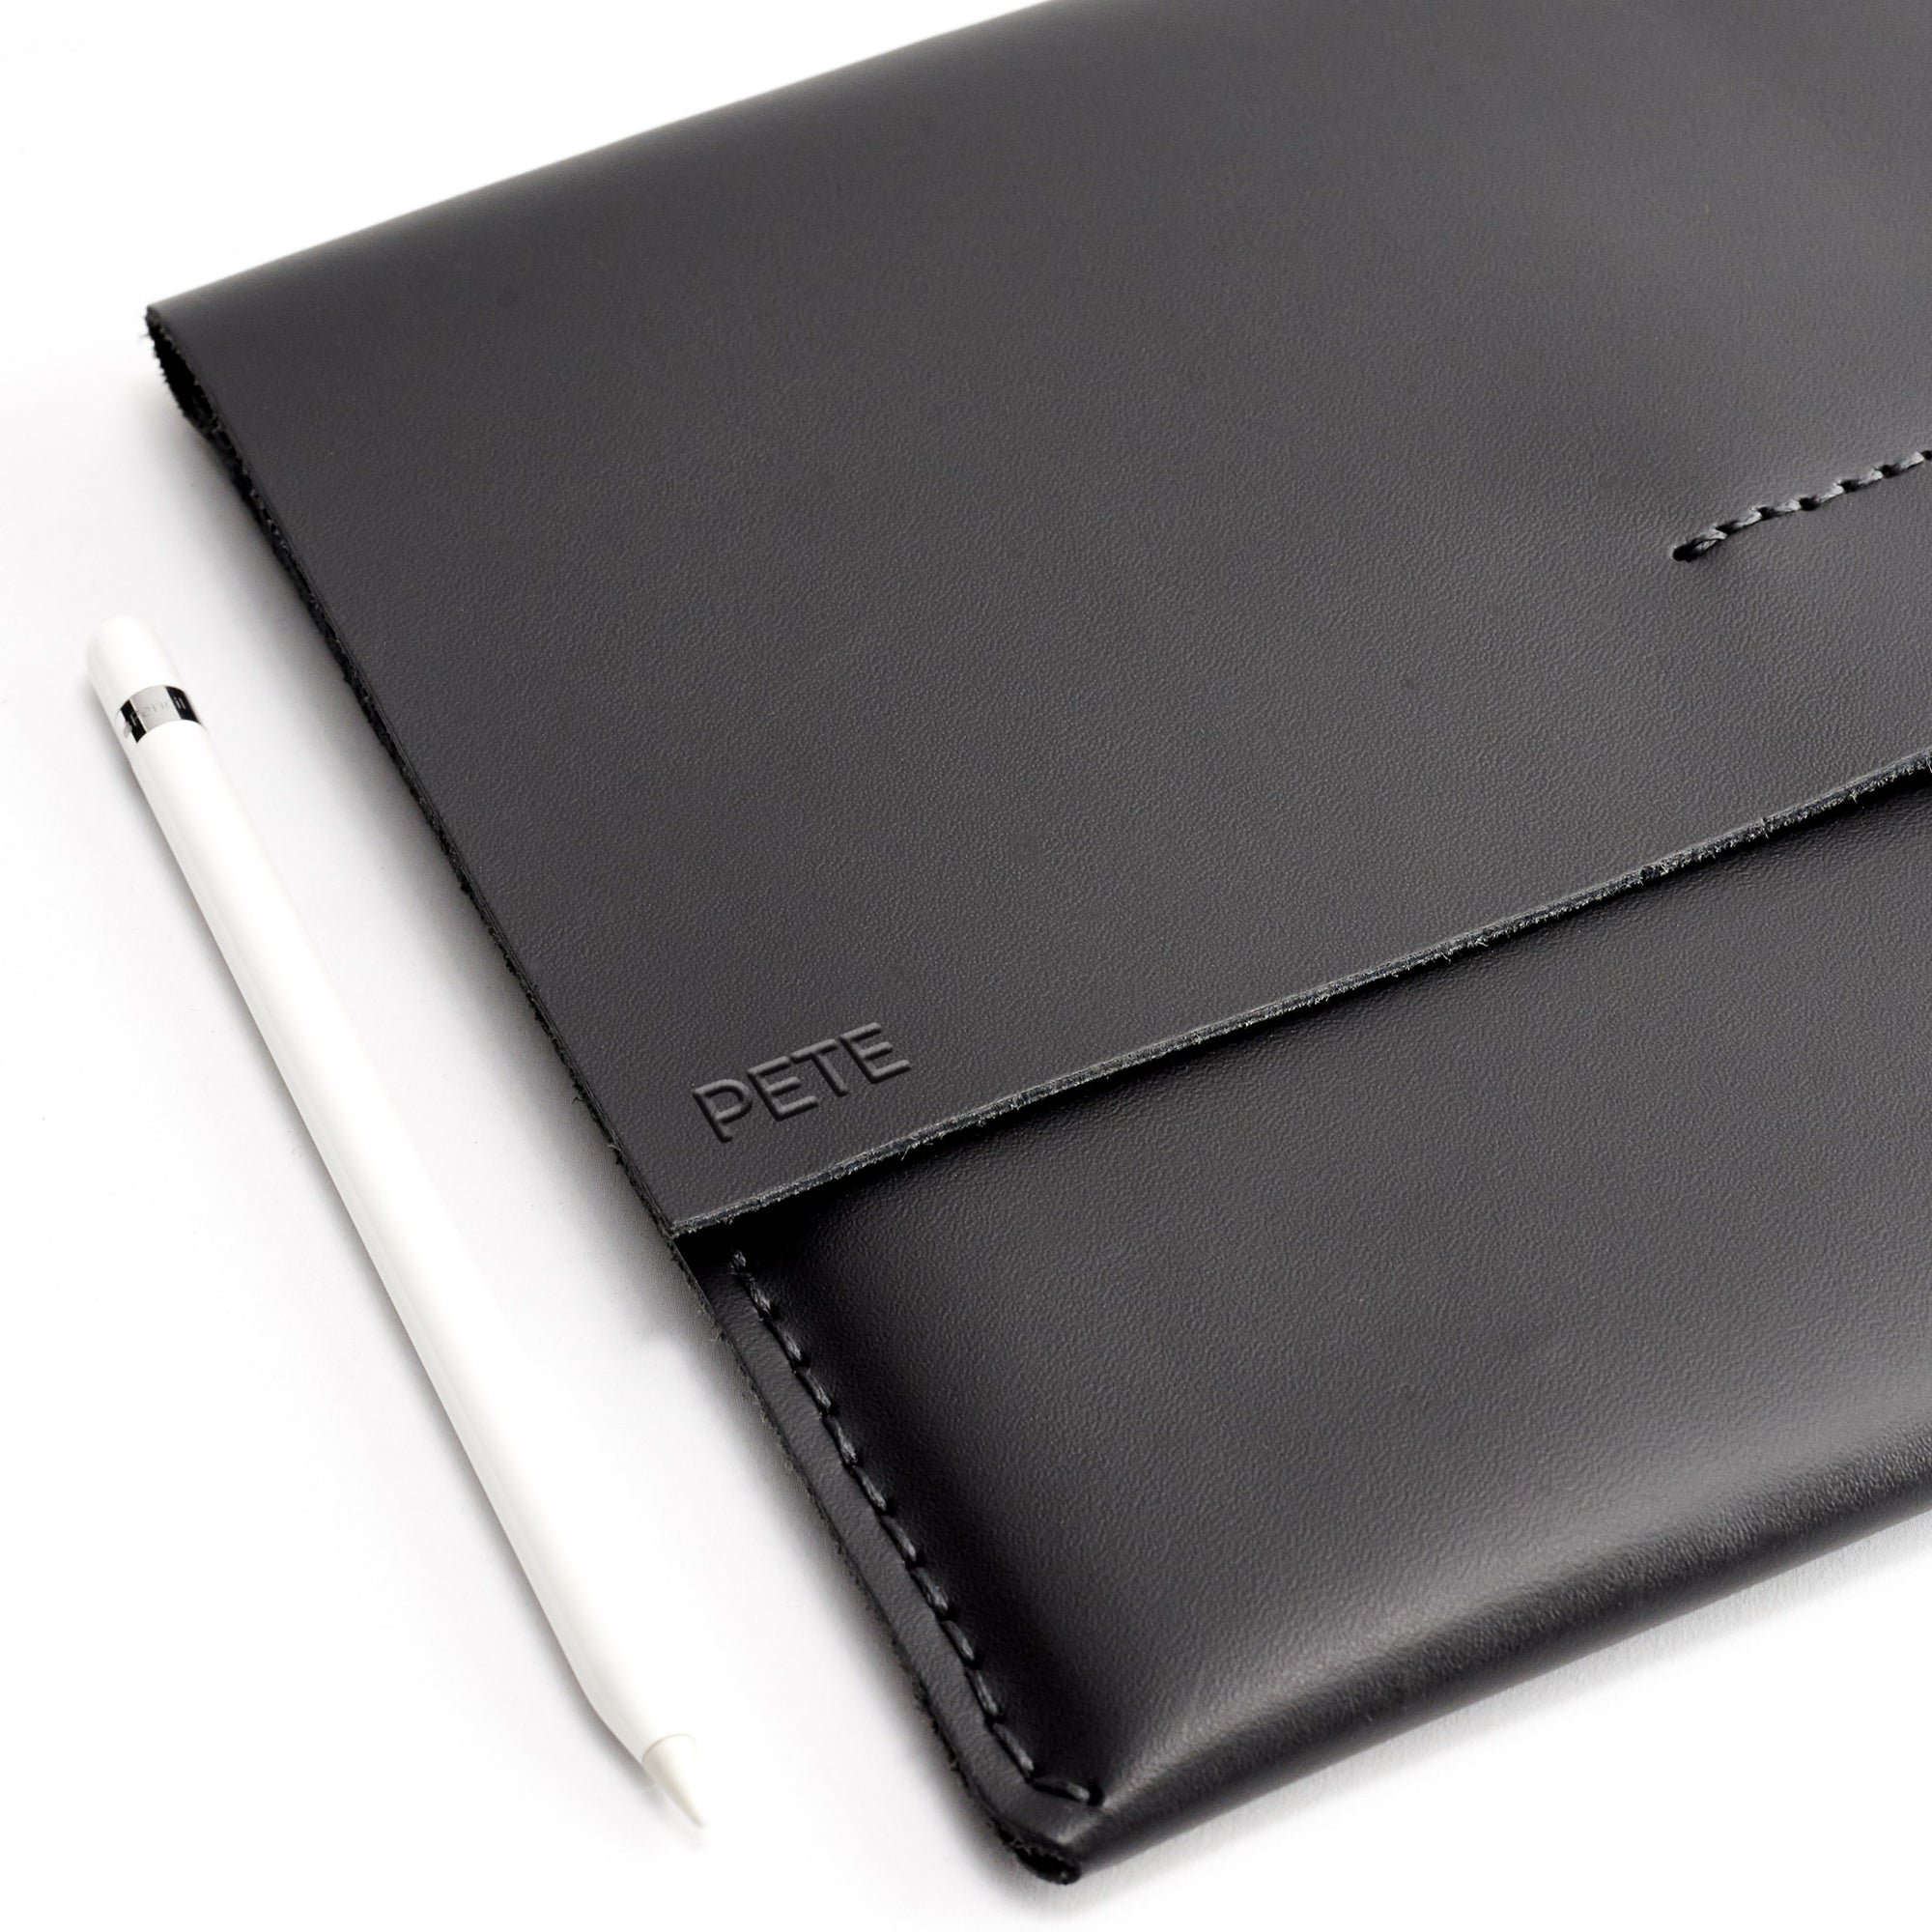 Custom embossing. iPad Sleeve. Leather Case Black for iPad by Capra Leather